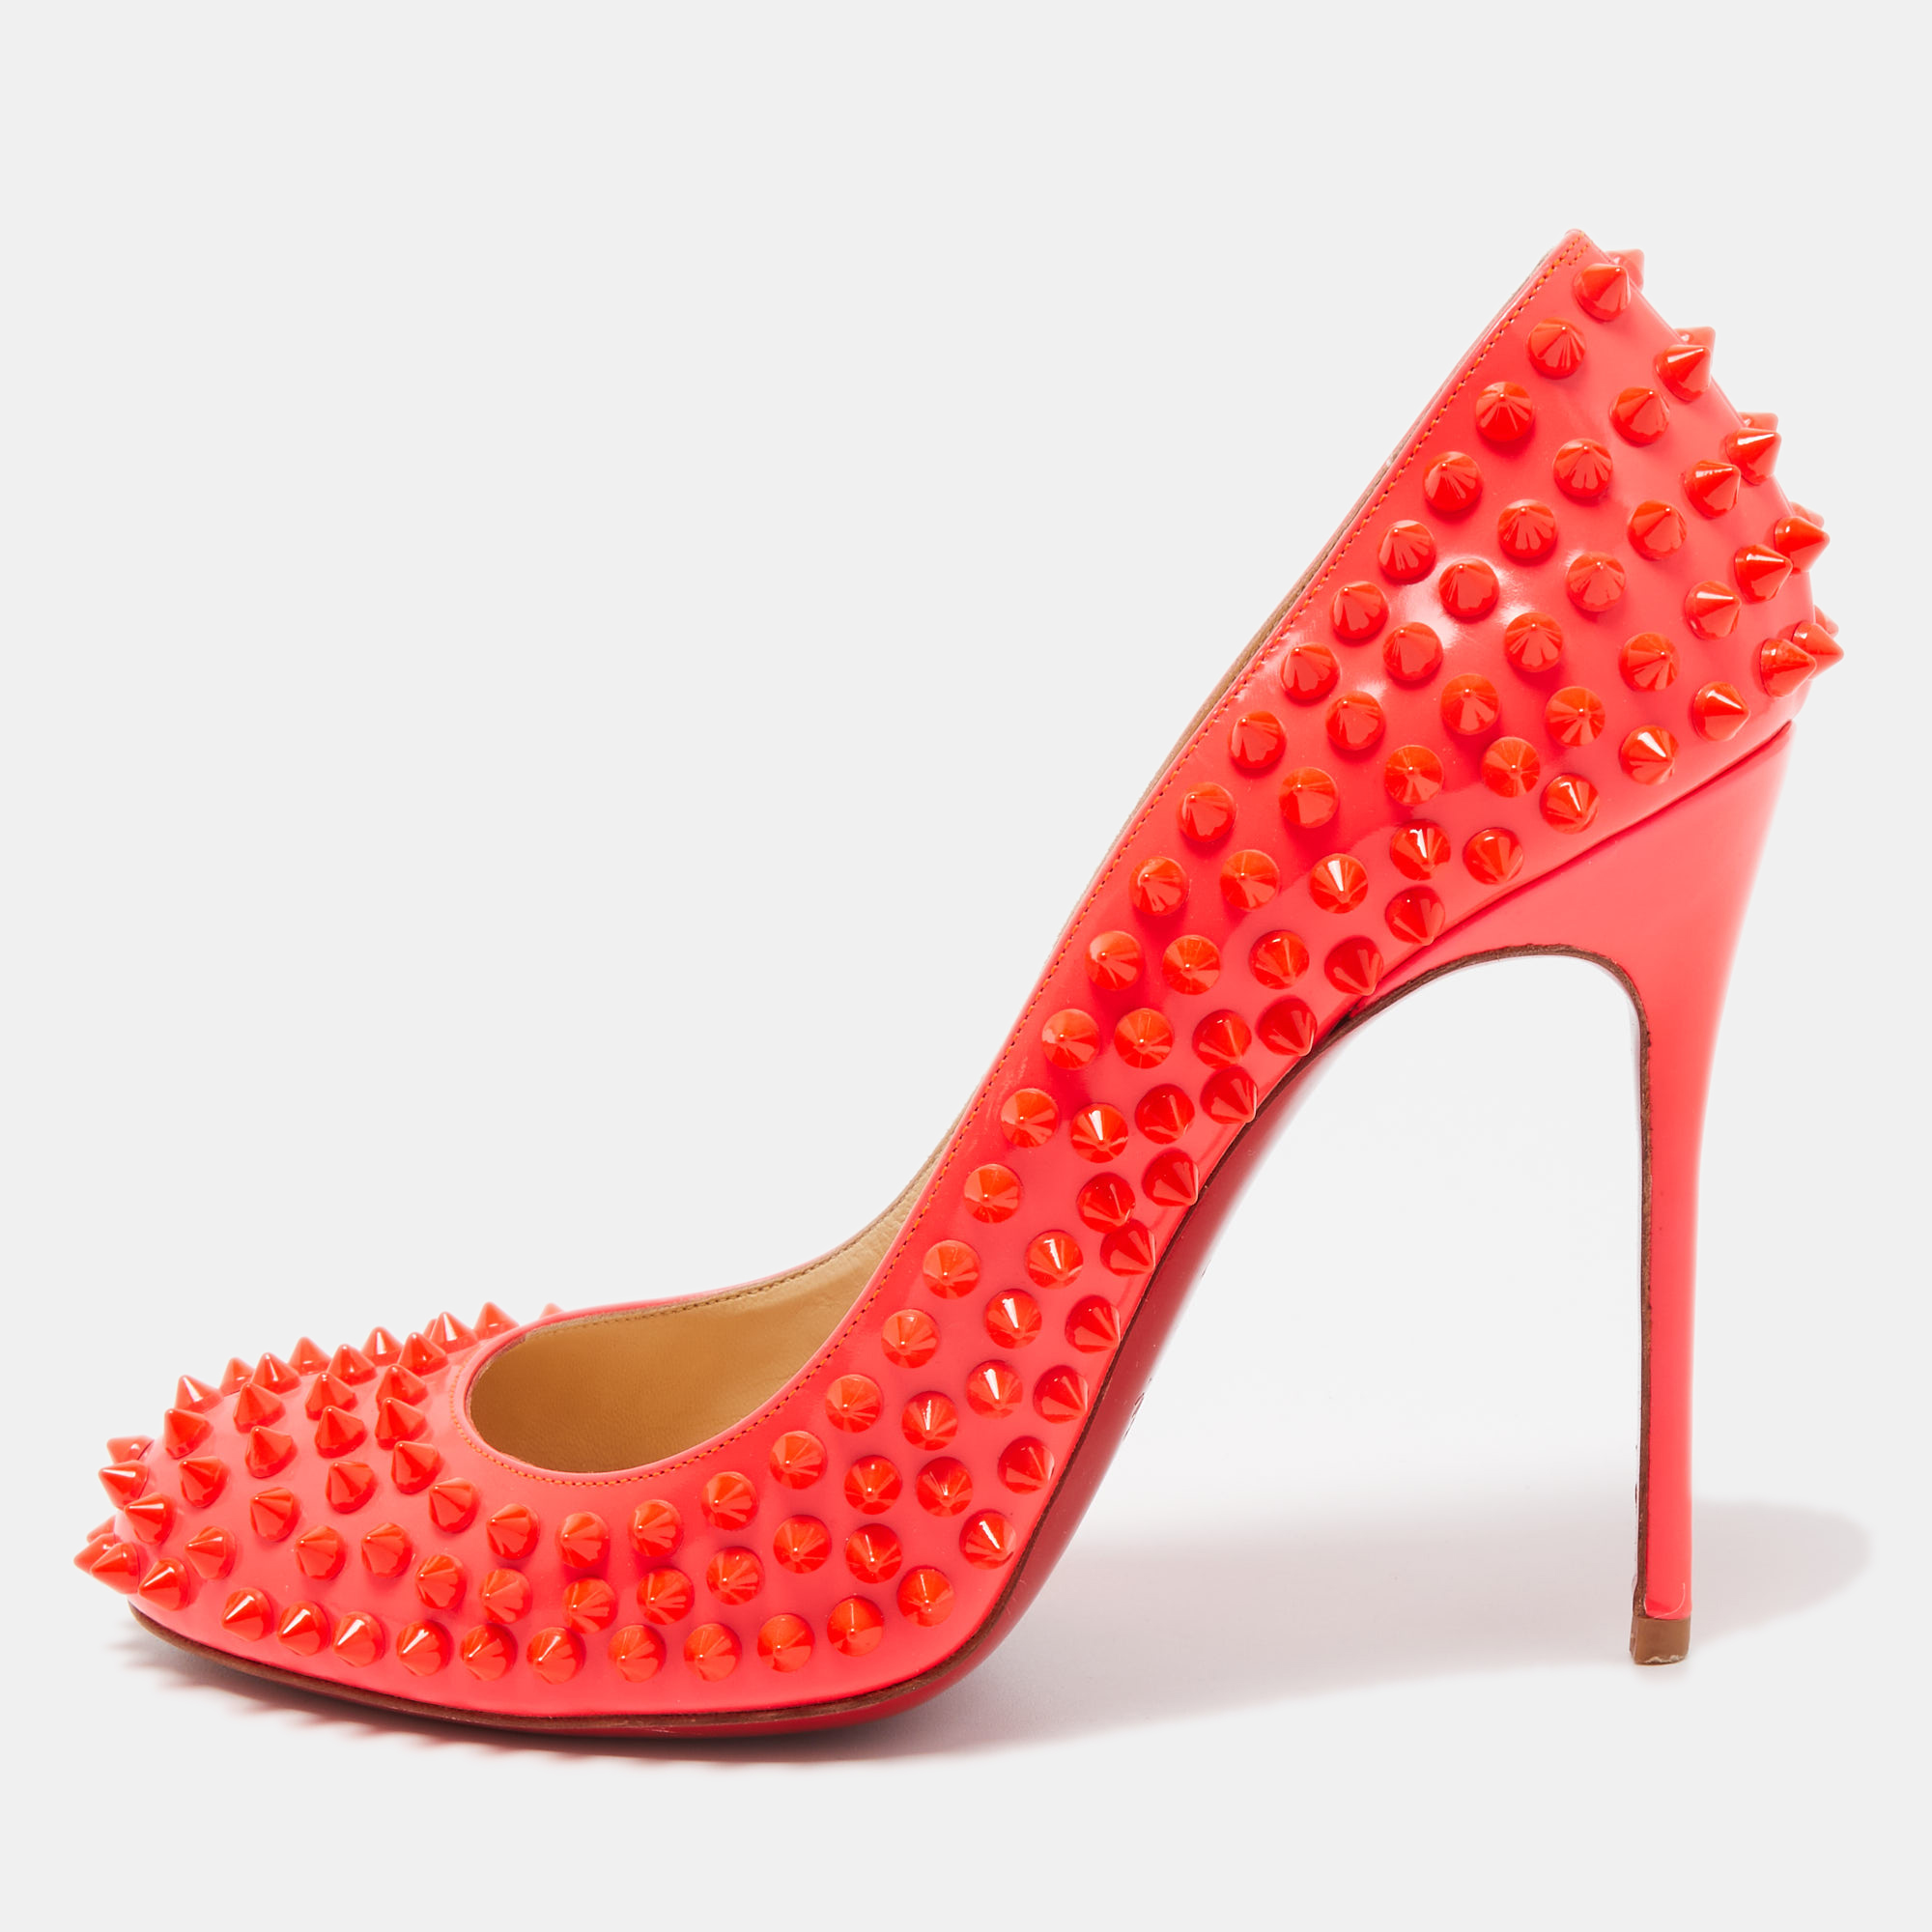 Pre-owned Christian Louboutin Neon Orange Patent Leather Fifi Spikes Pumps Size 39